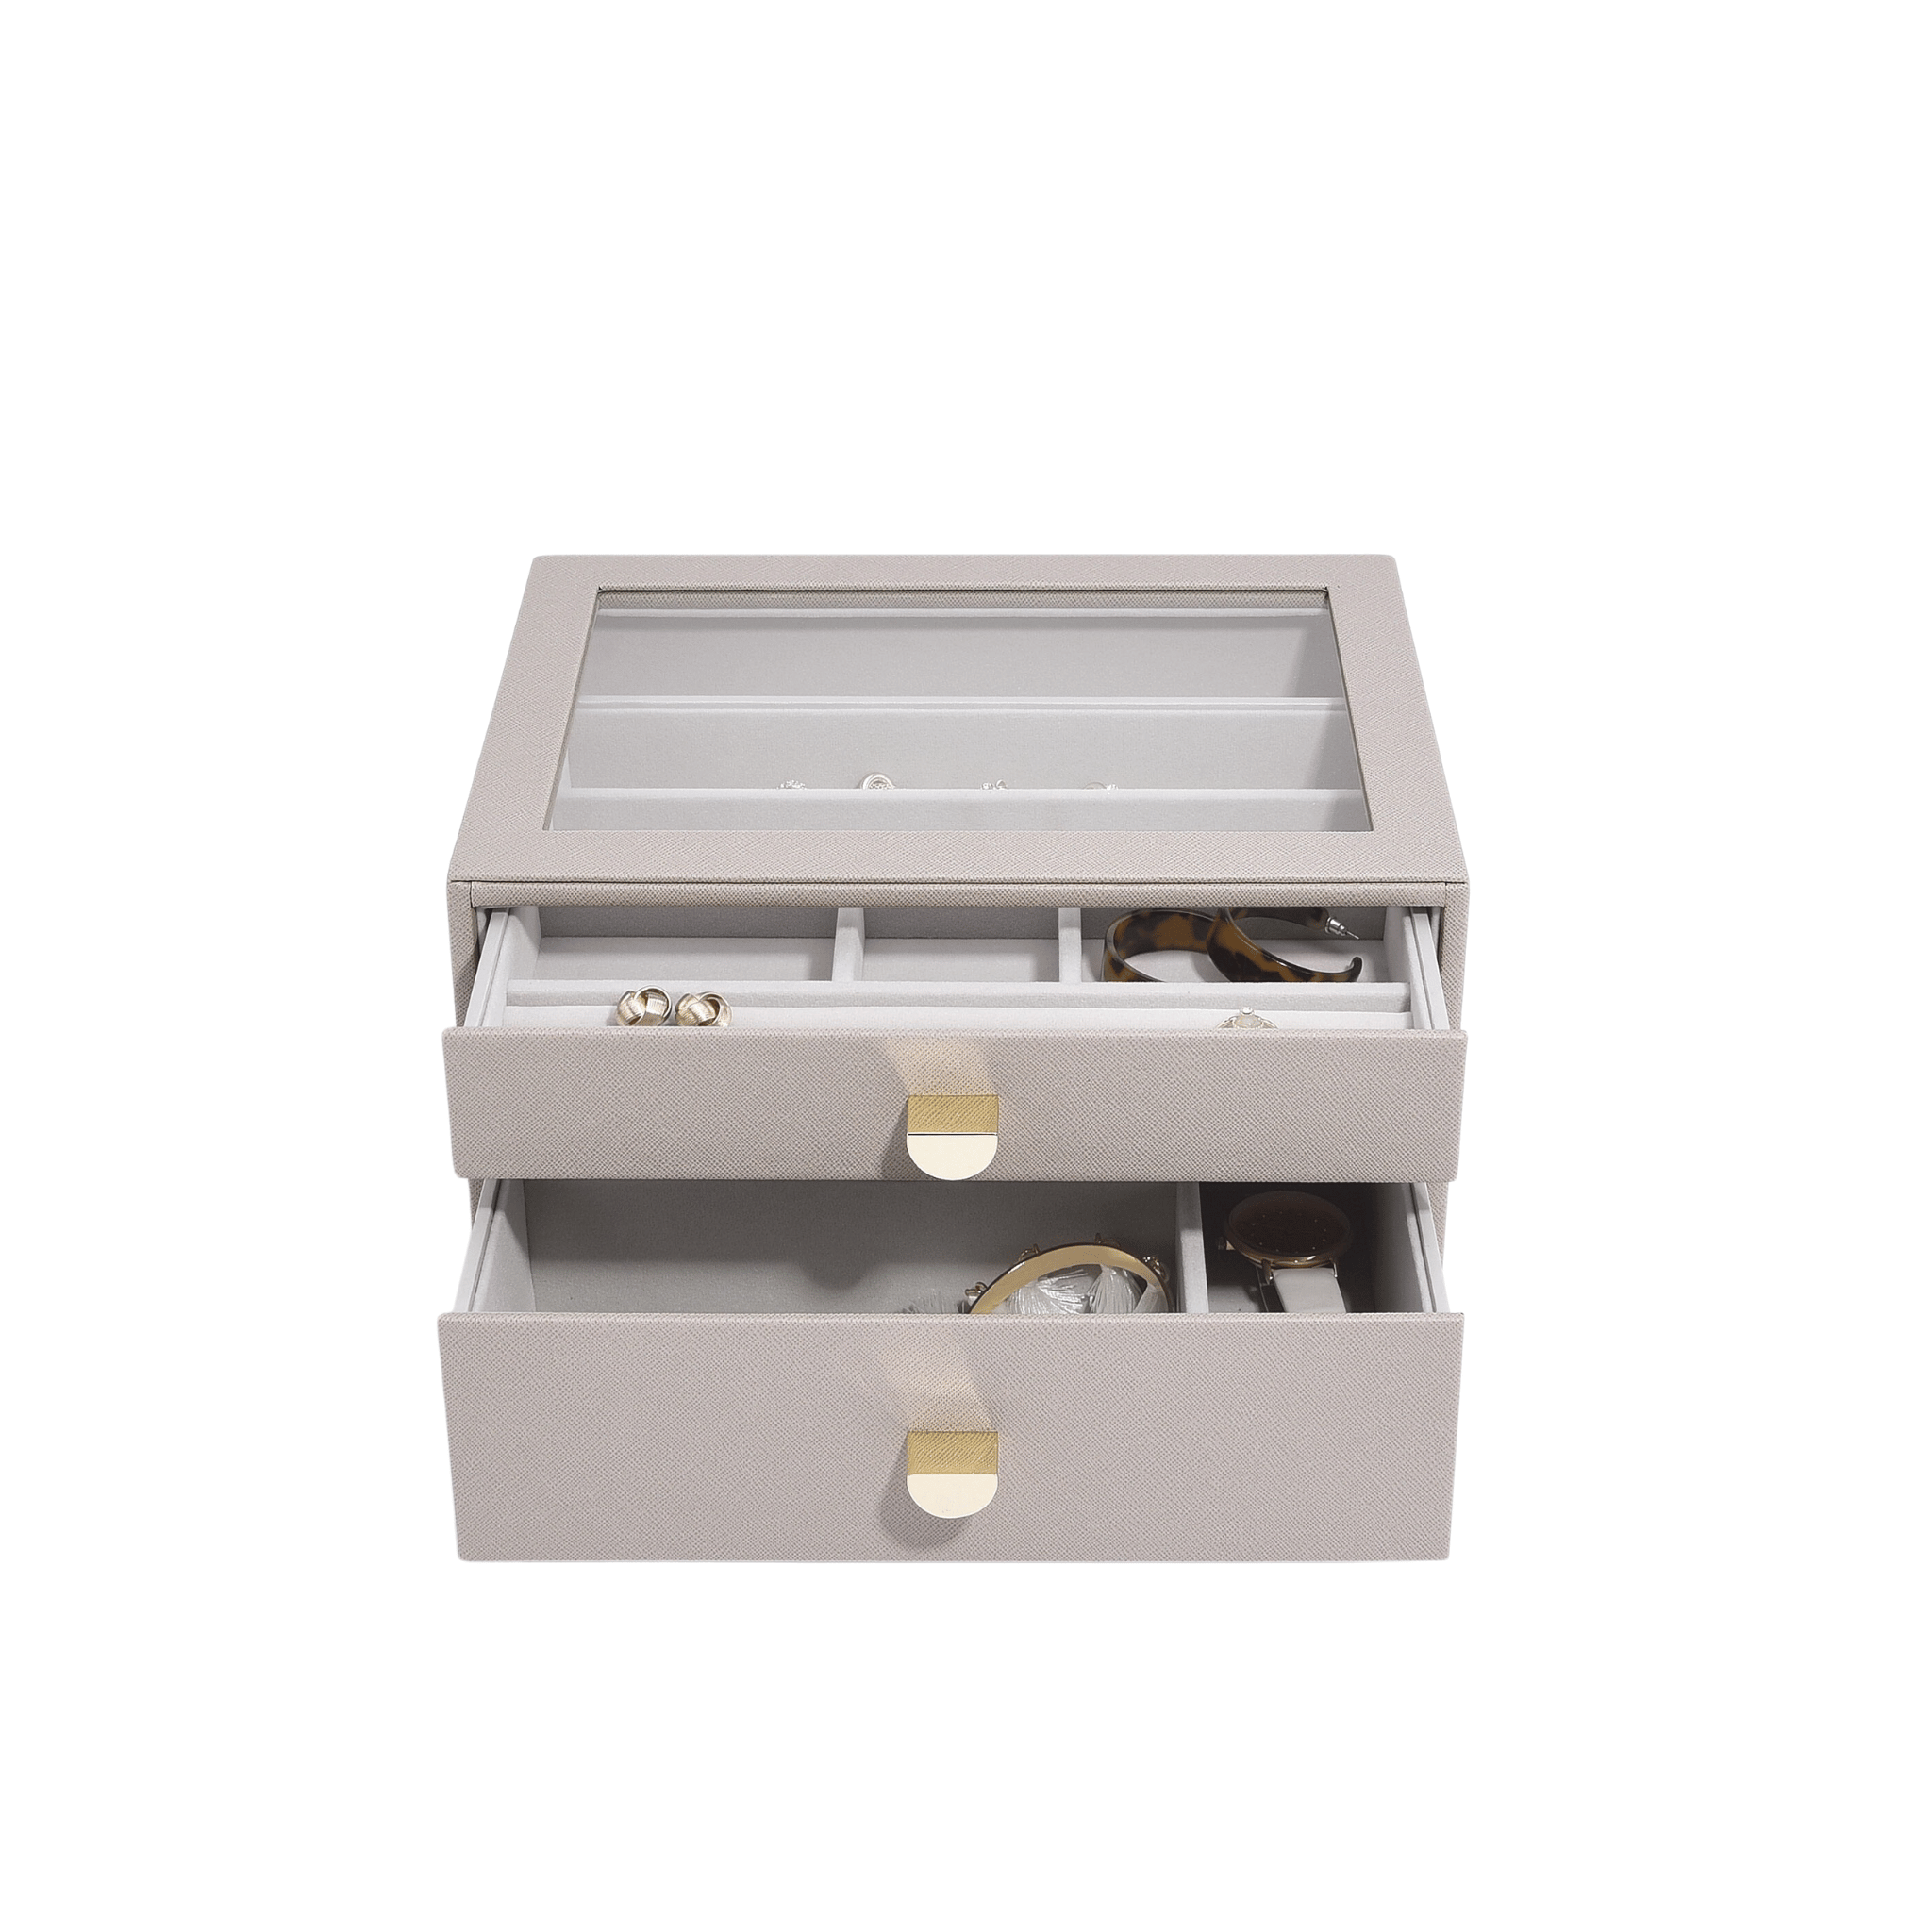 STACKERS Classic Drawer 2-Set / Taupe - STACKERS BOX